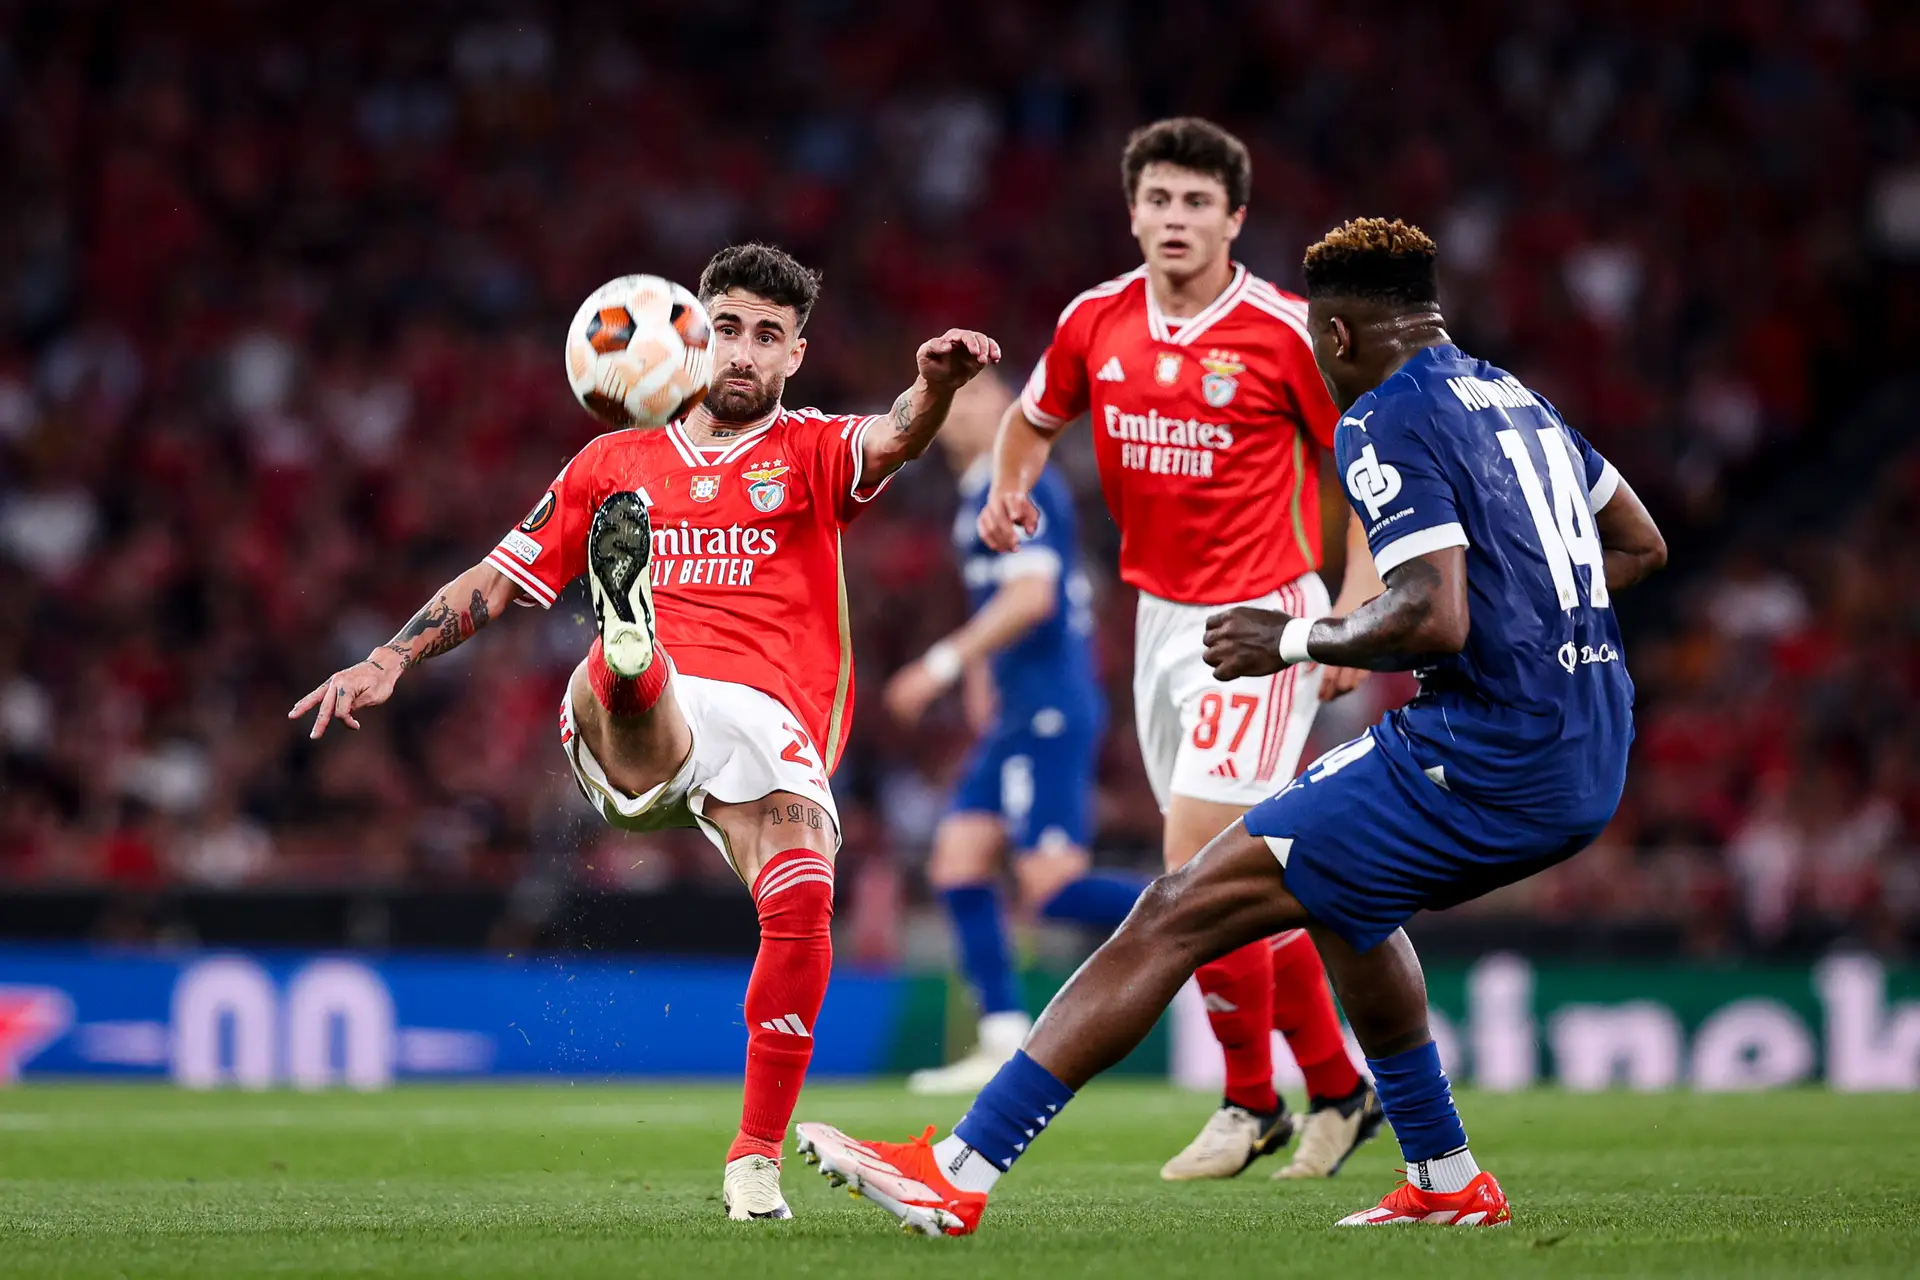 Can Benfica achieve success in the Europa League?